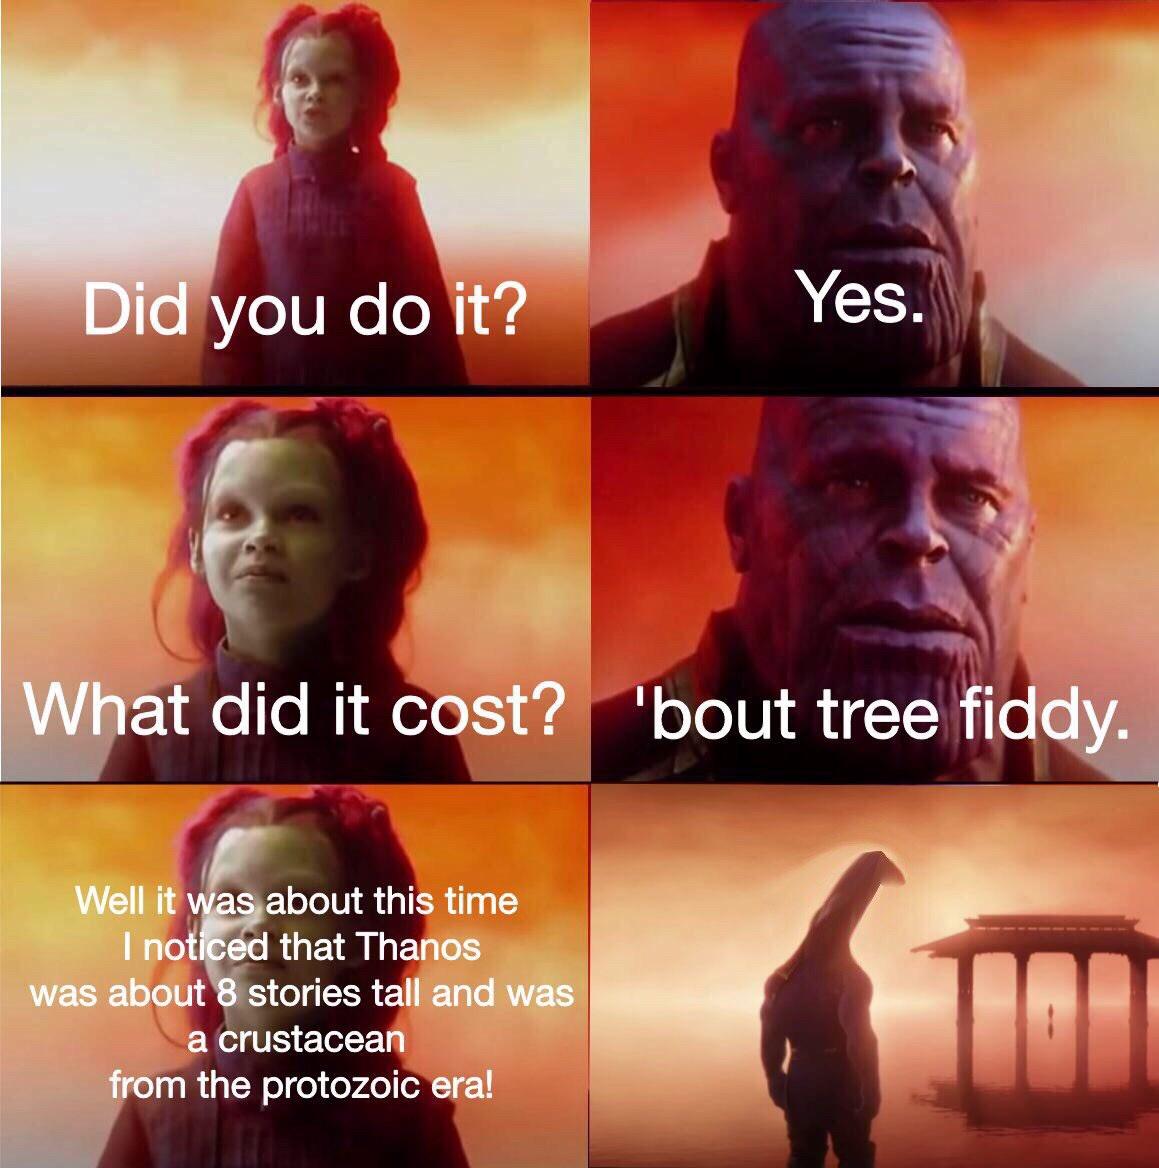 thanos tree fiddy - Did you do it? Yes. What did it cost? 'bout tree fiddy. Well it was about this time I noticed that Thanos was about 8 stories tall and was a crustacean from the protozoic era! On